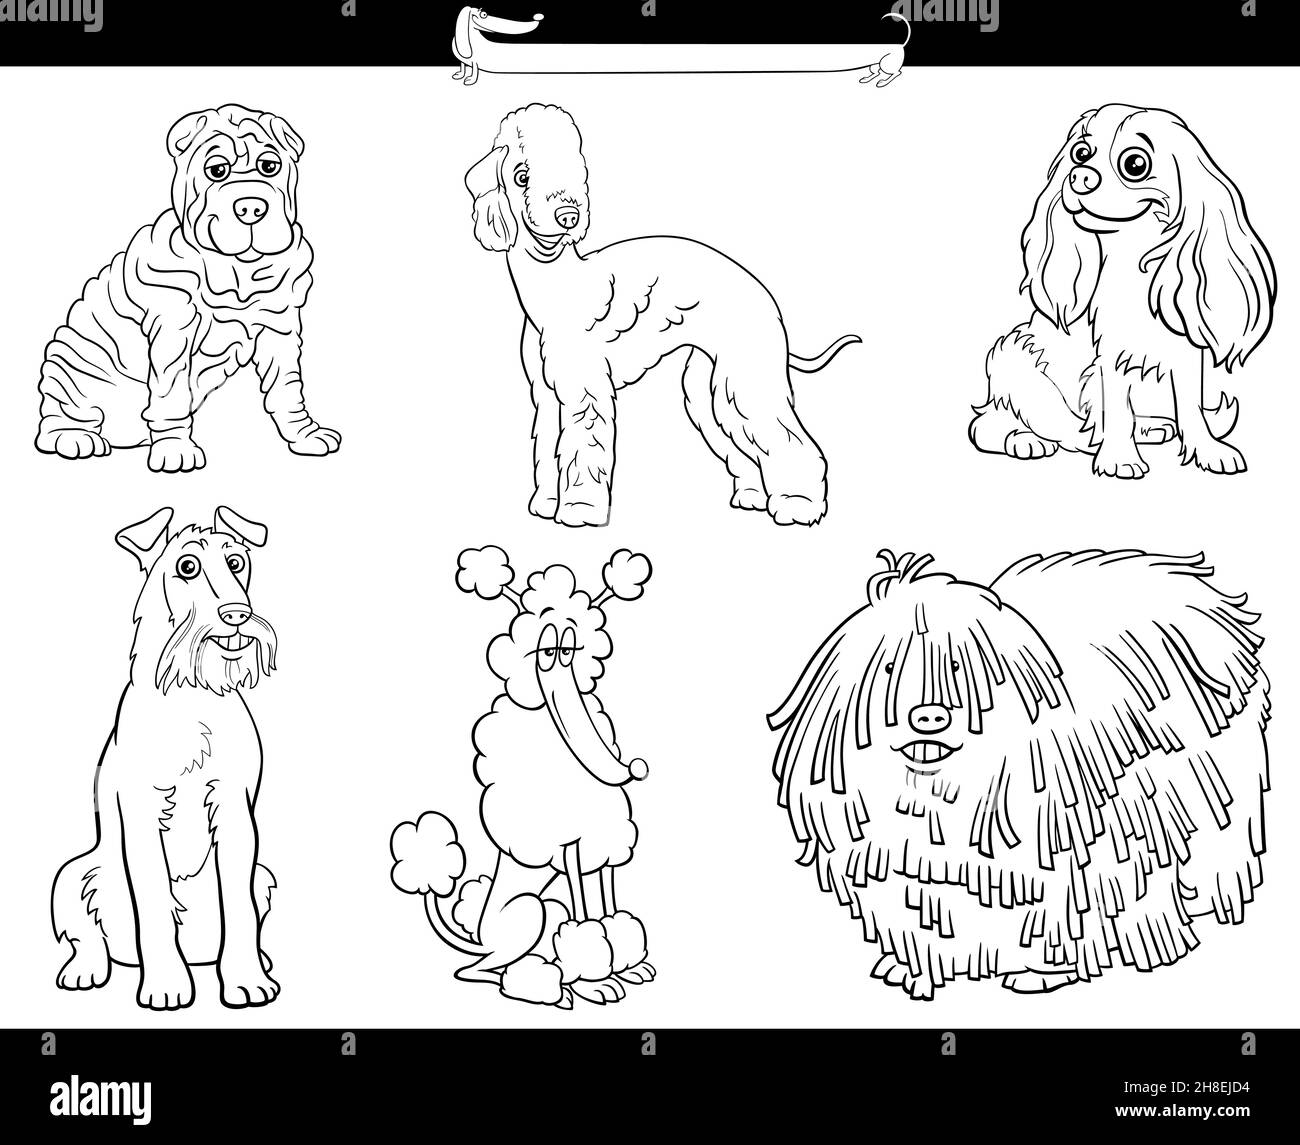 Black and white cartoon illustration of funny purebred dogs comic characters set Stock Vector